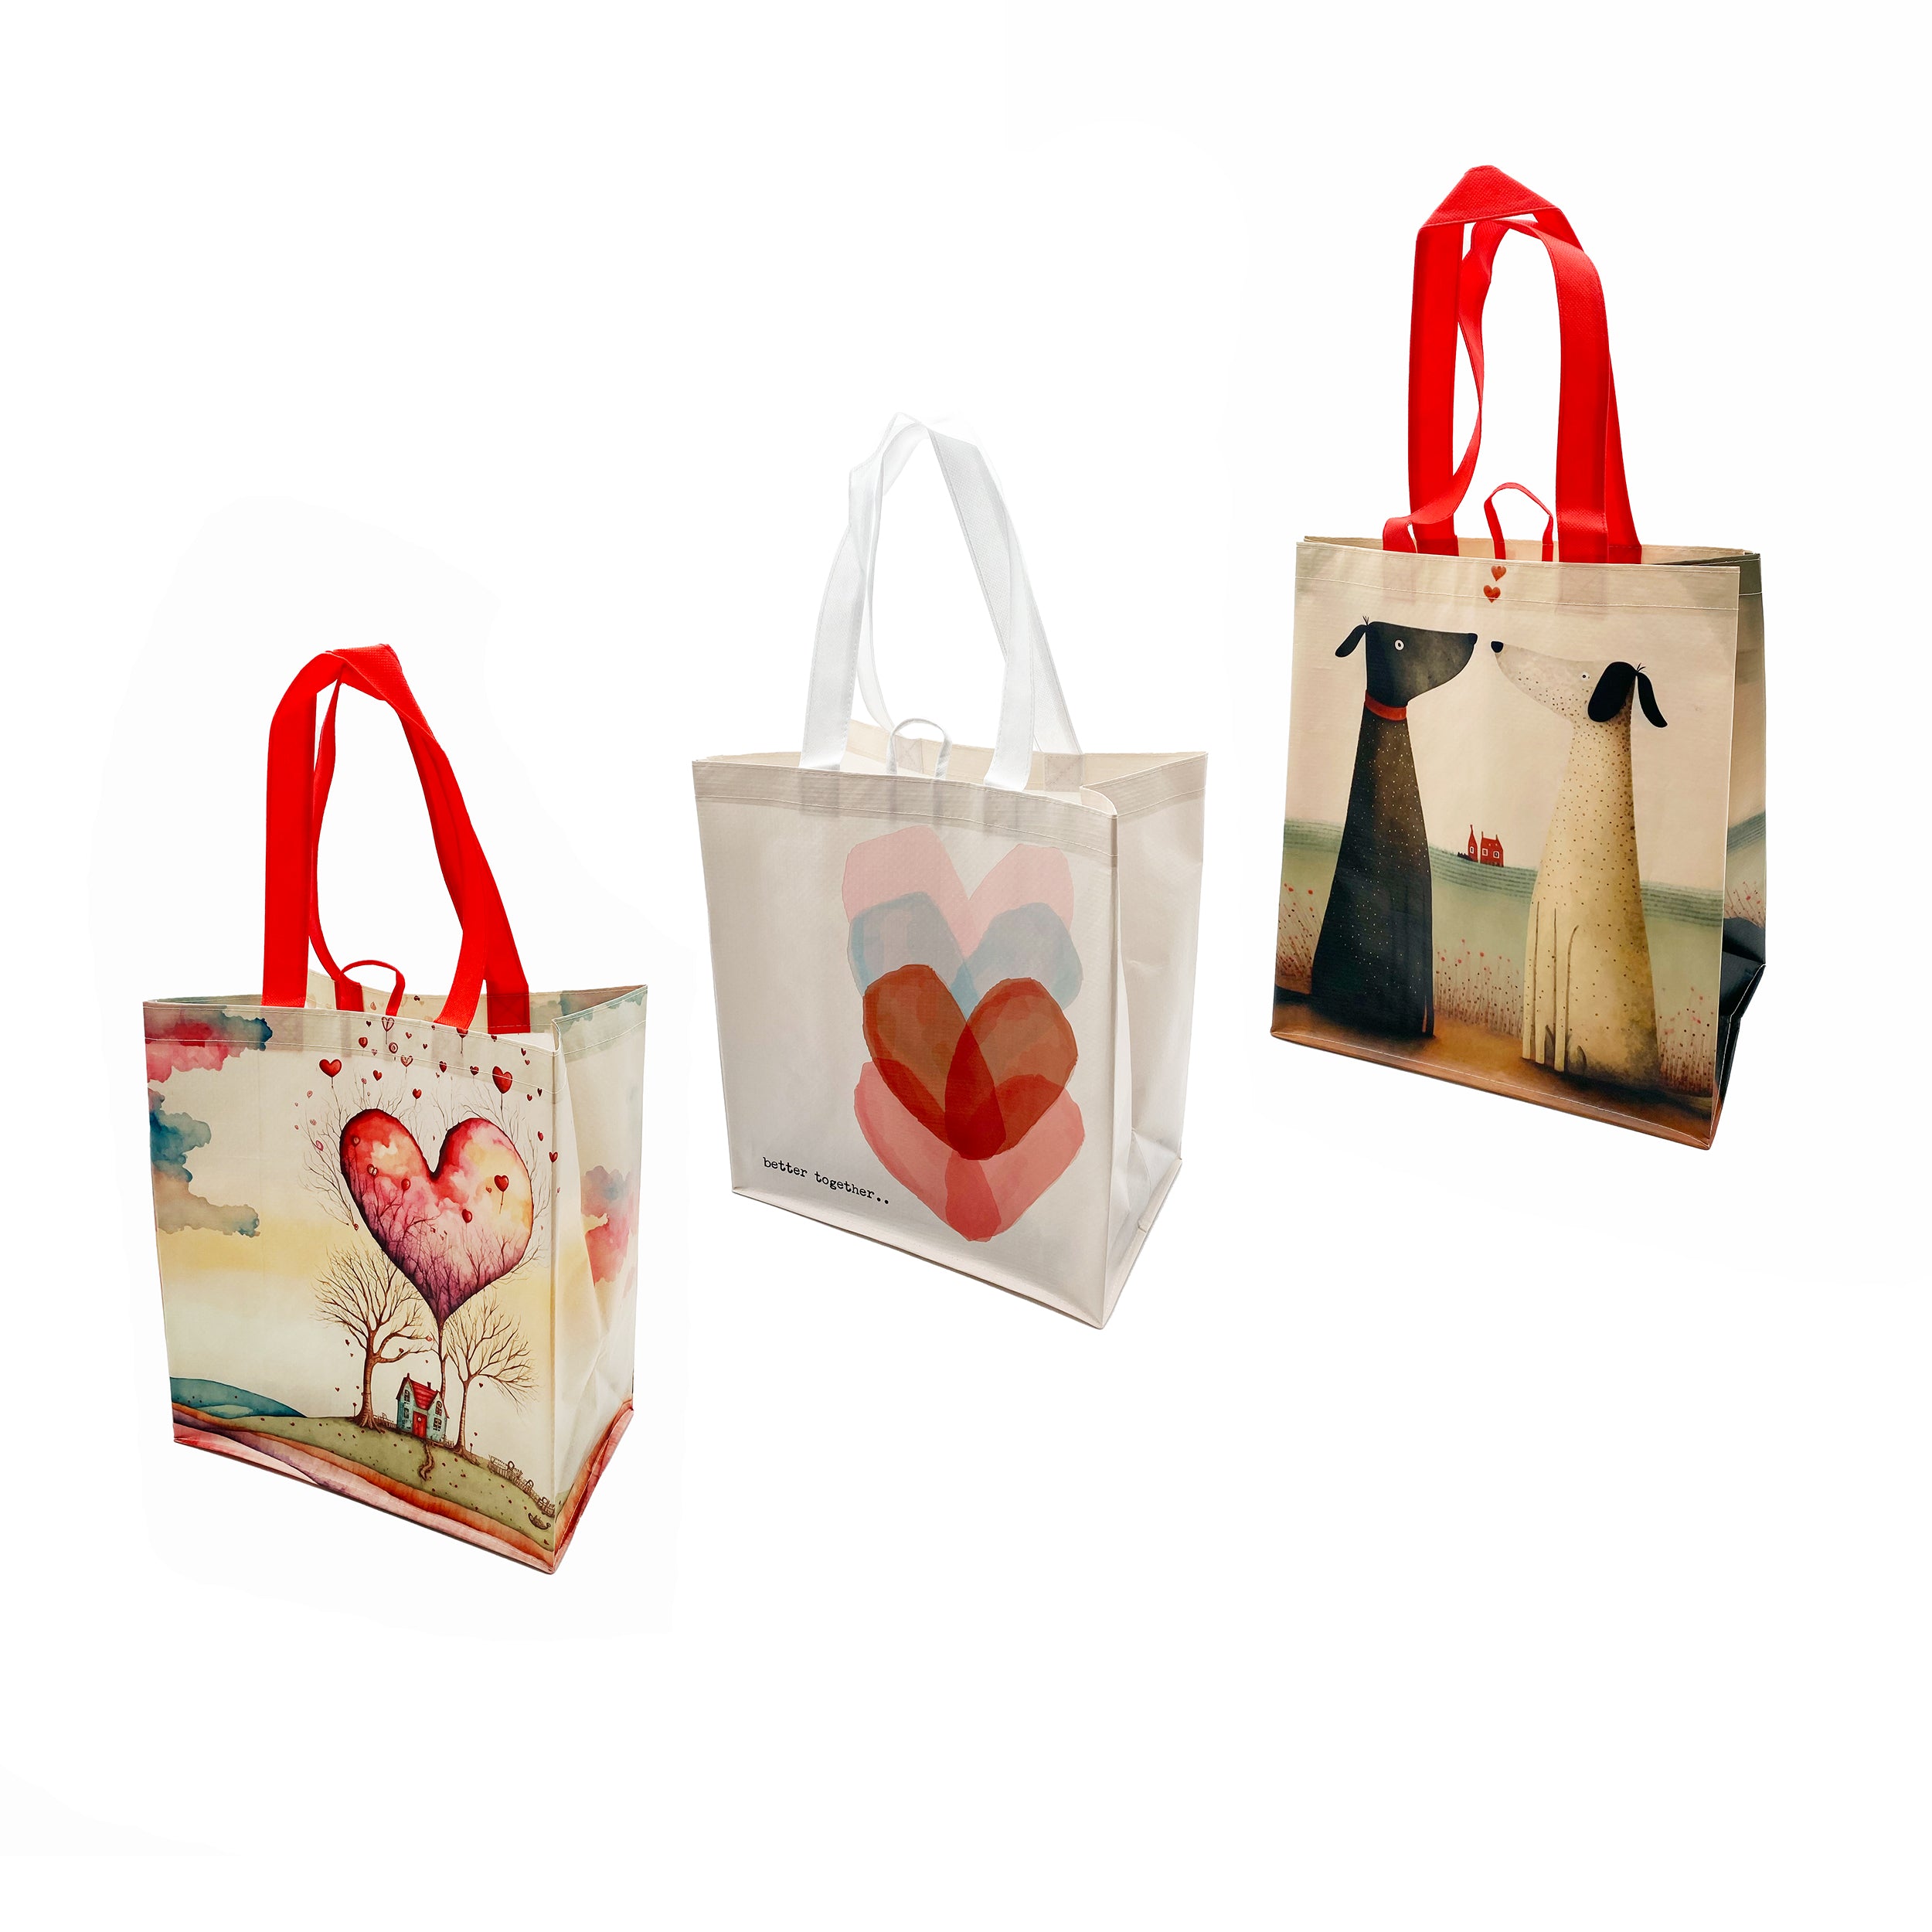 Reusable Shopping Bags for sale in Kendall County, Illinois